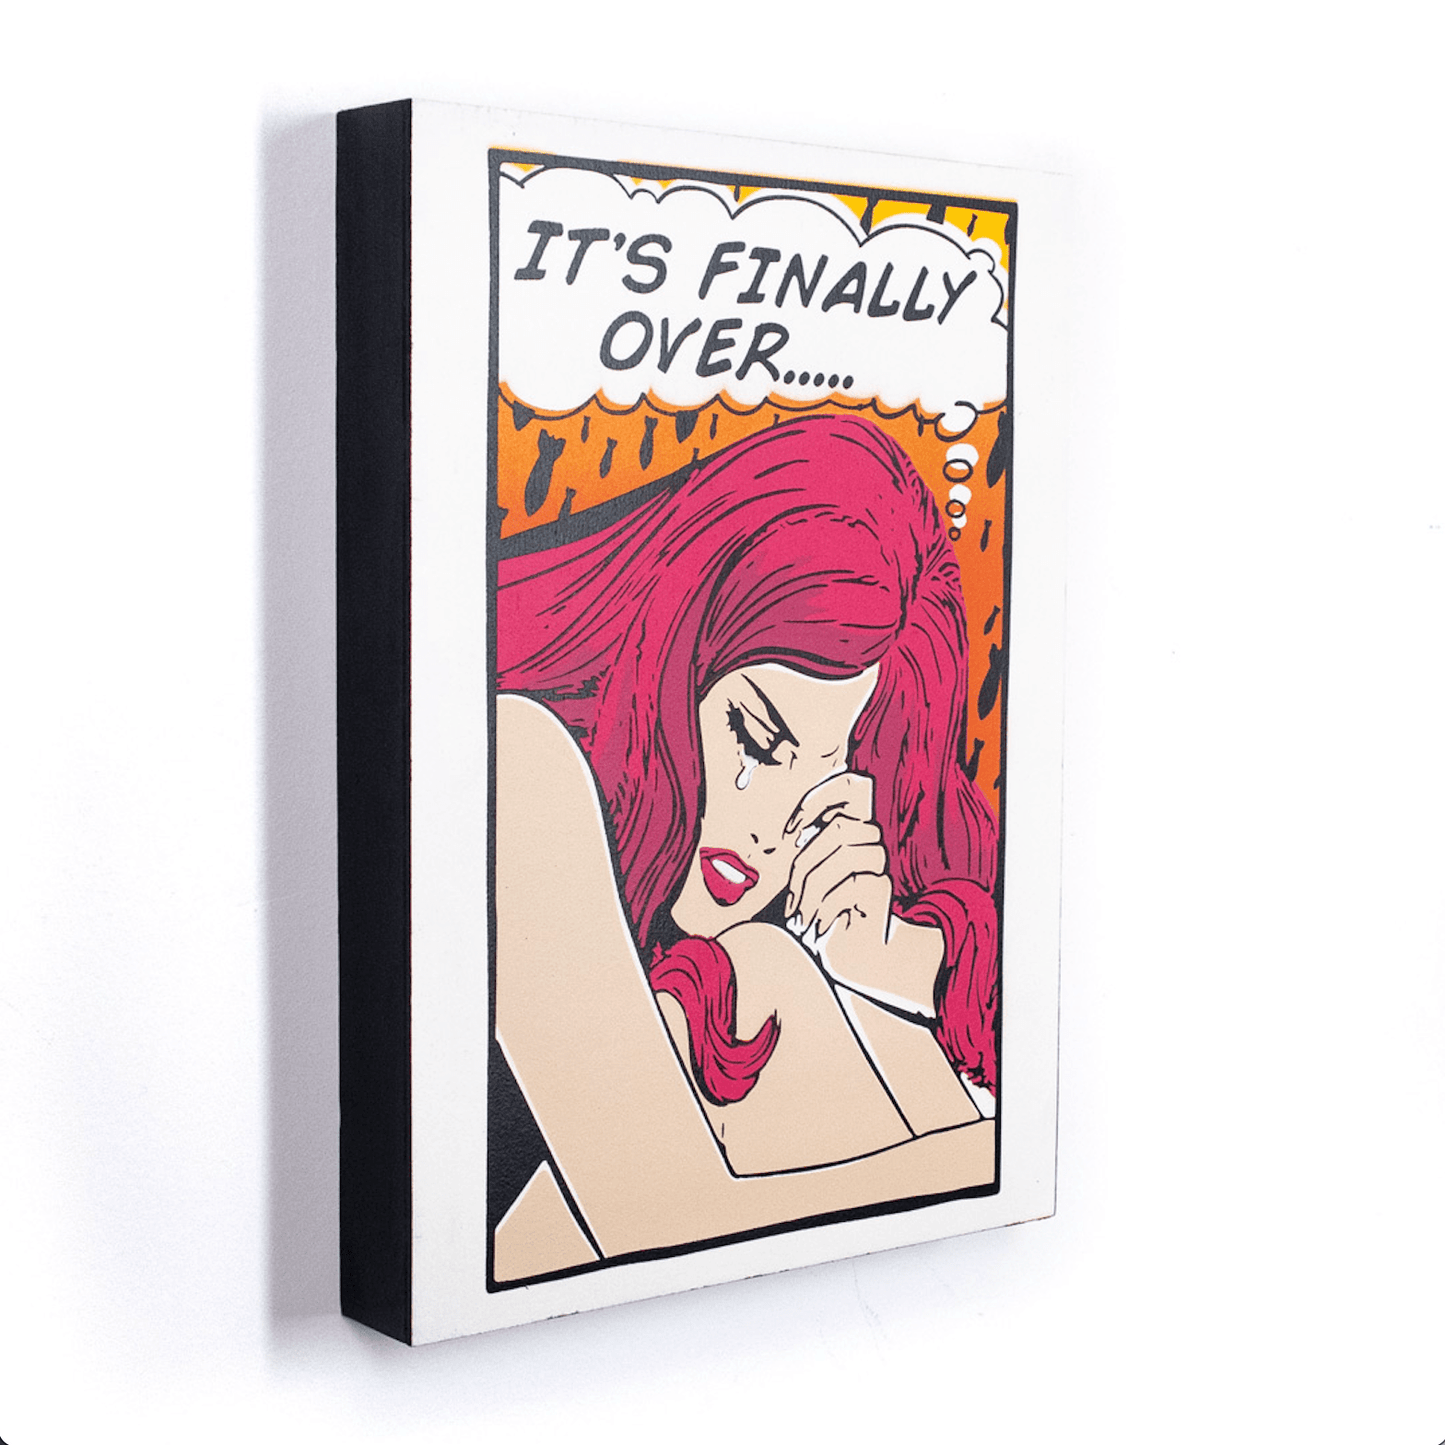 HAND PAINTED "IT’S FINALLY OVER" - by DENIAL - UNDERRATED SHOP